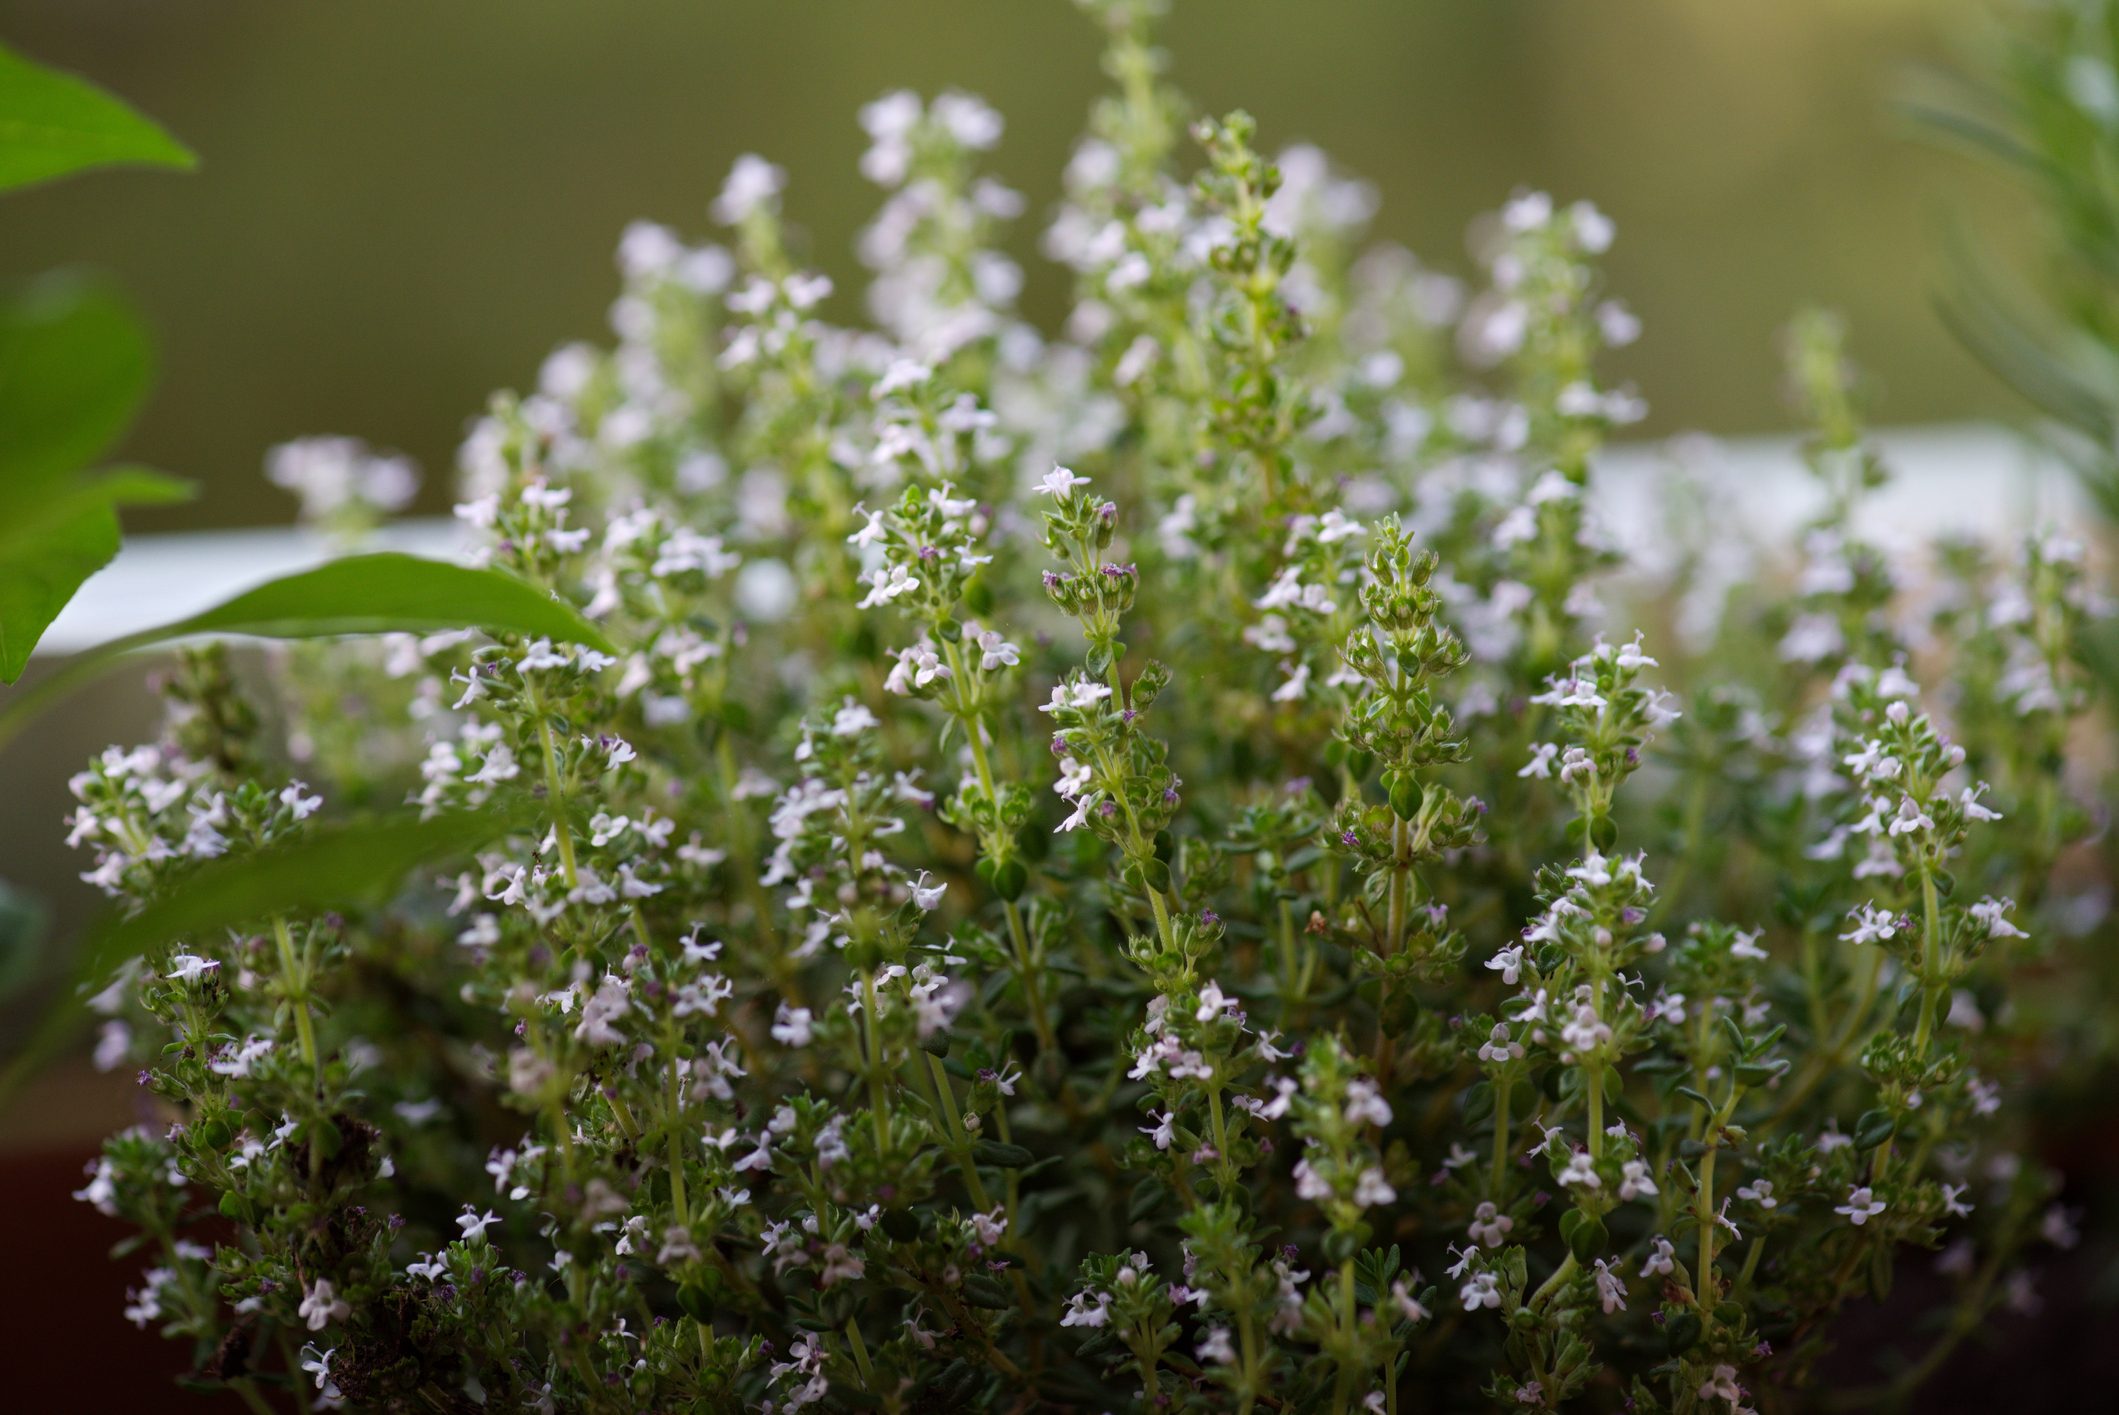 Is Thyme a Perennial or Annual Plant?